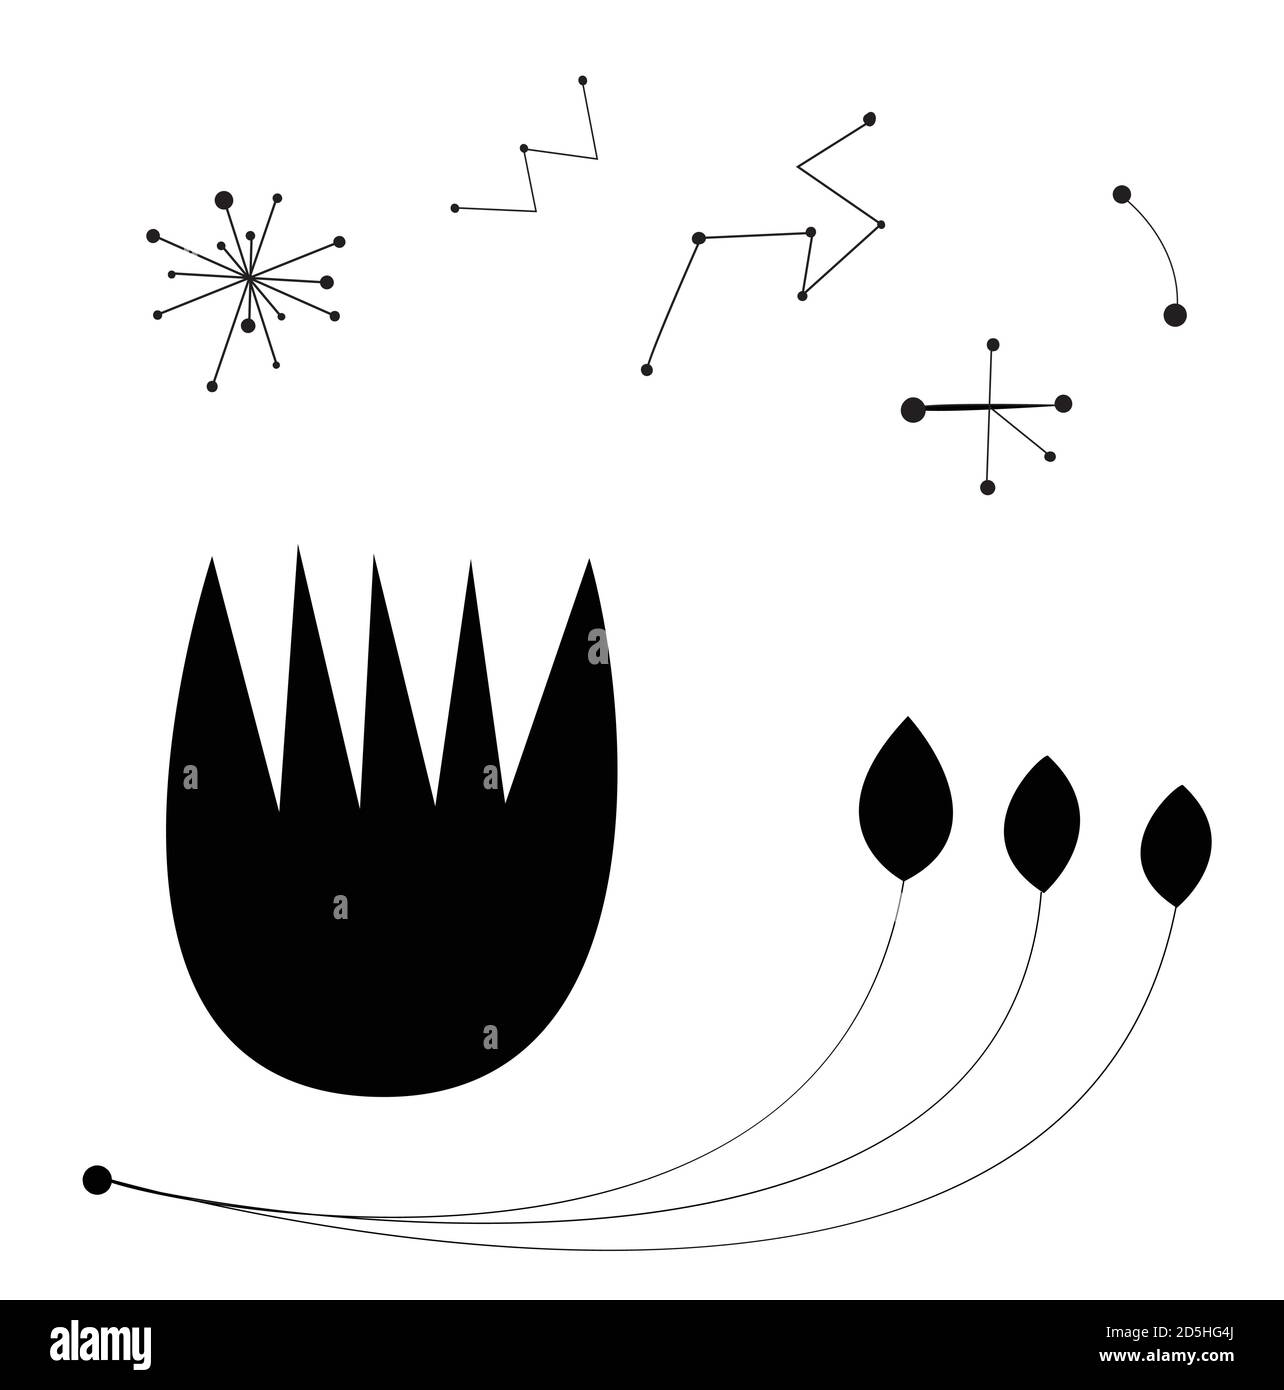 Abstract flower with constellation inspired by surrealism. Stock Vector